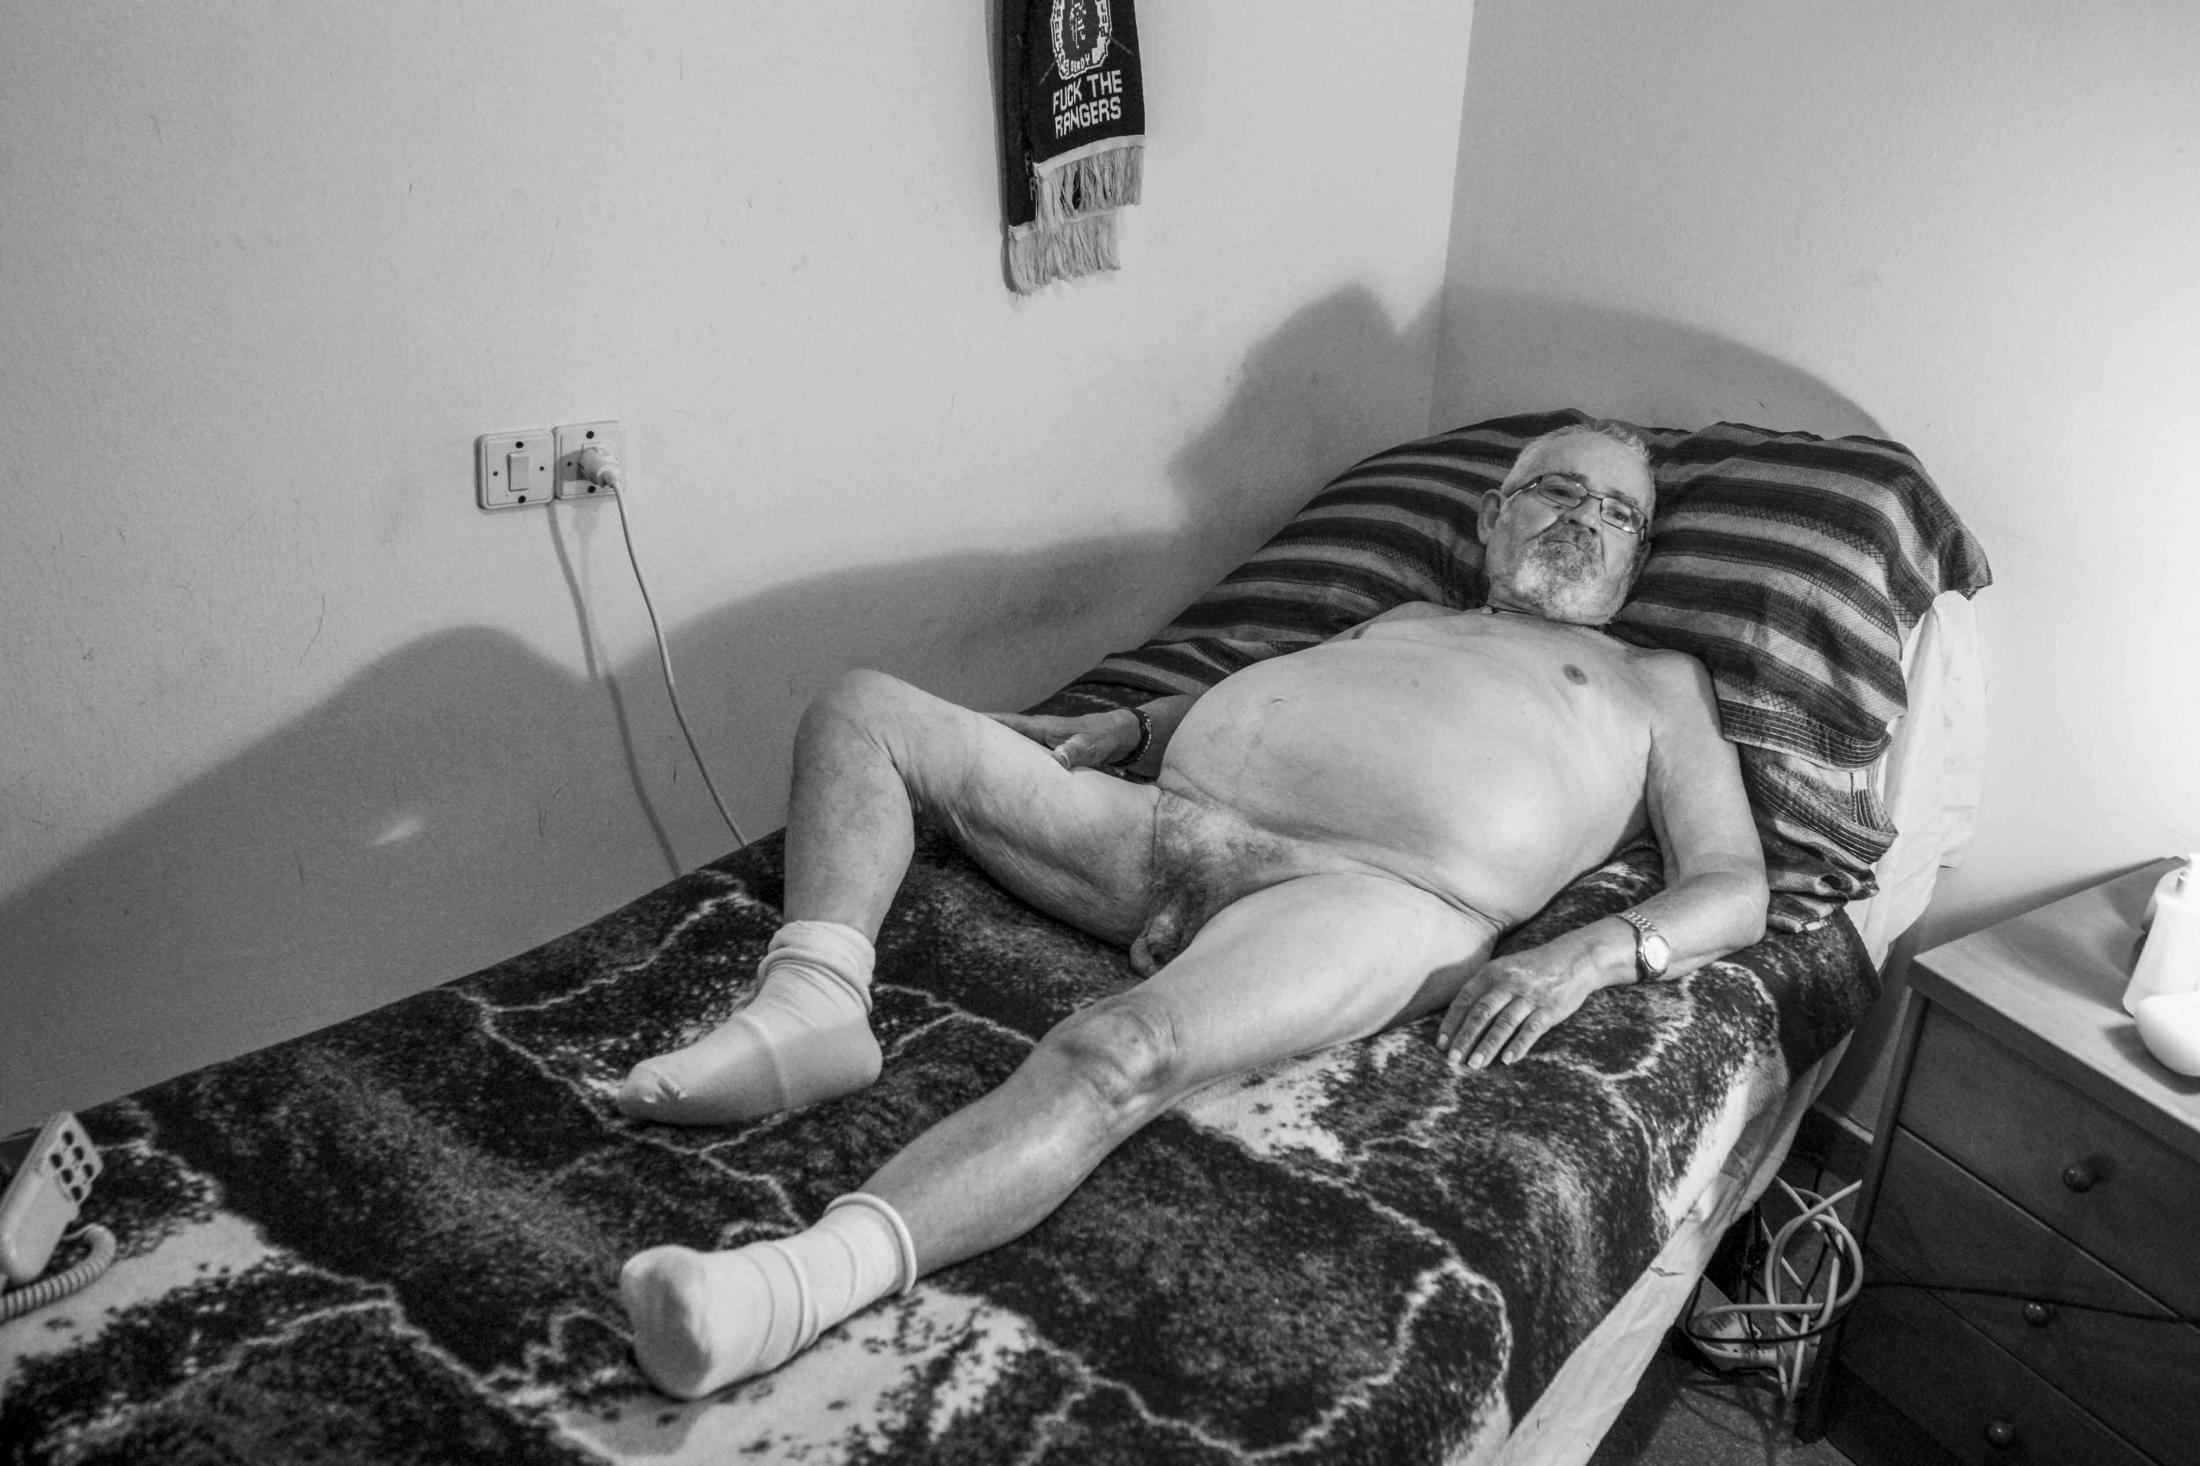 Hijos sin padres - Impotent naked body. Pere lost his youth many years ago...